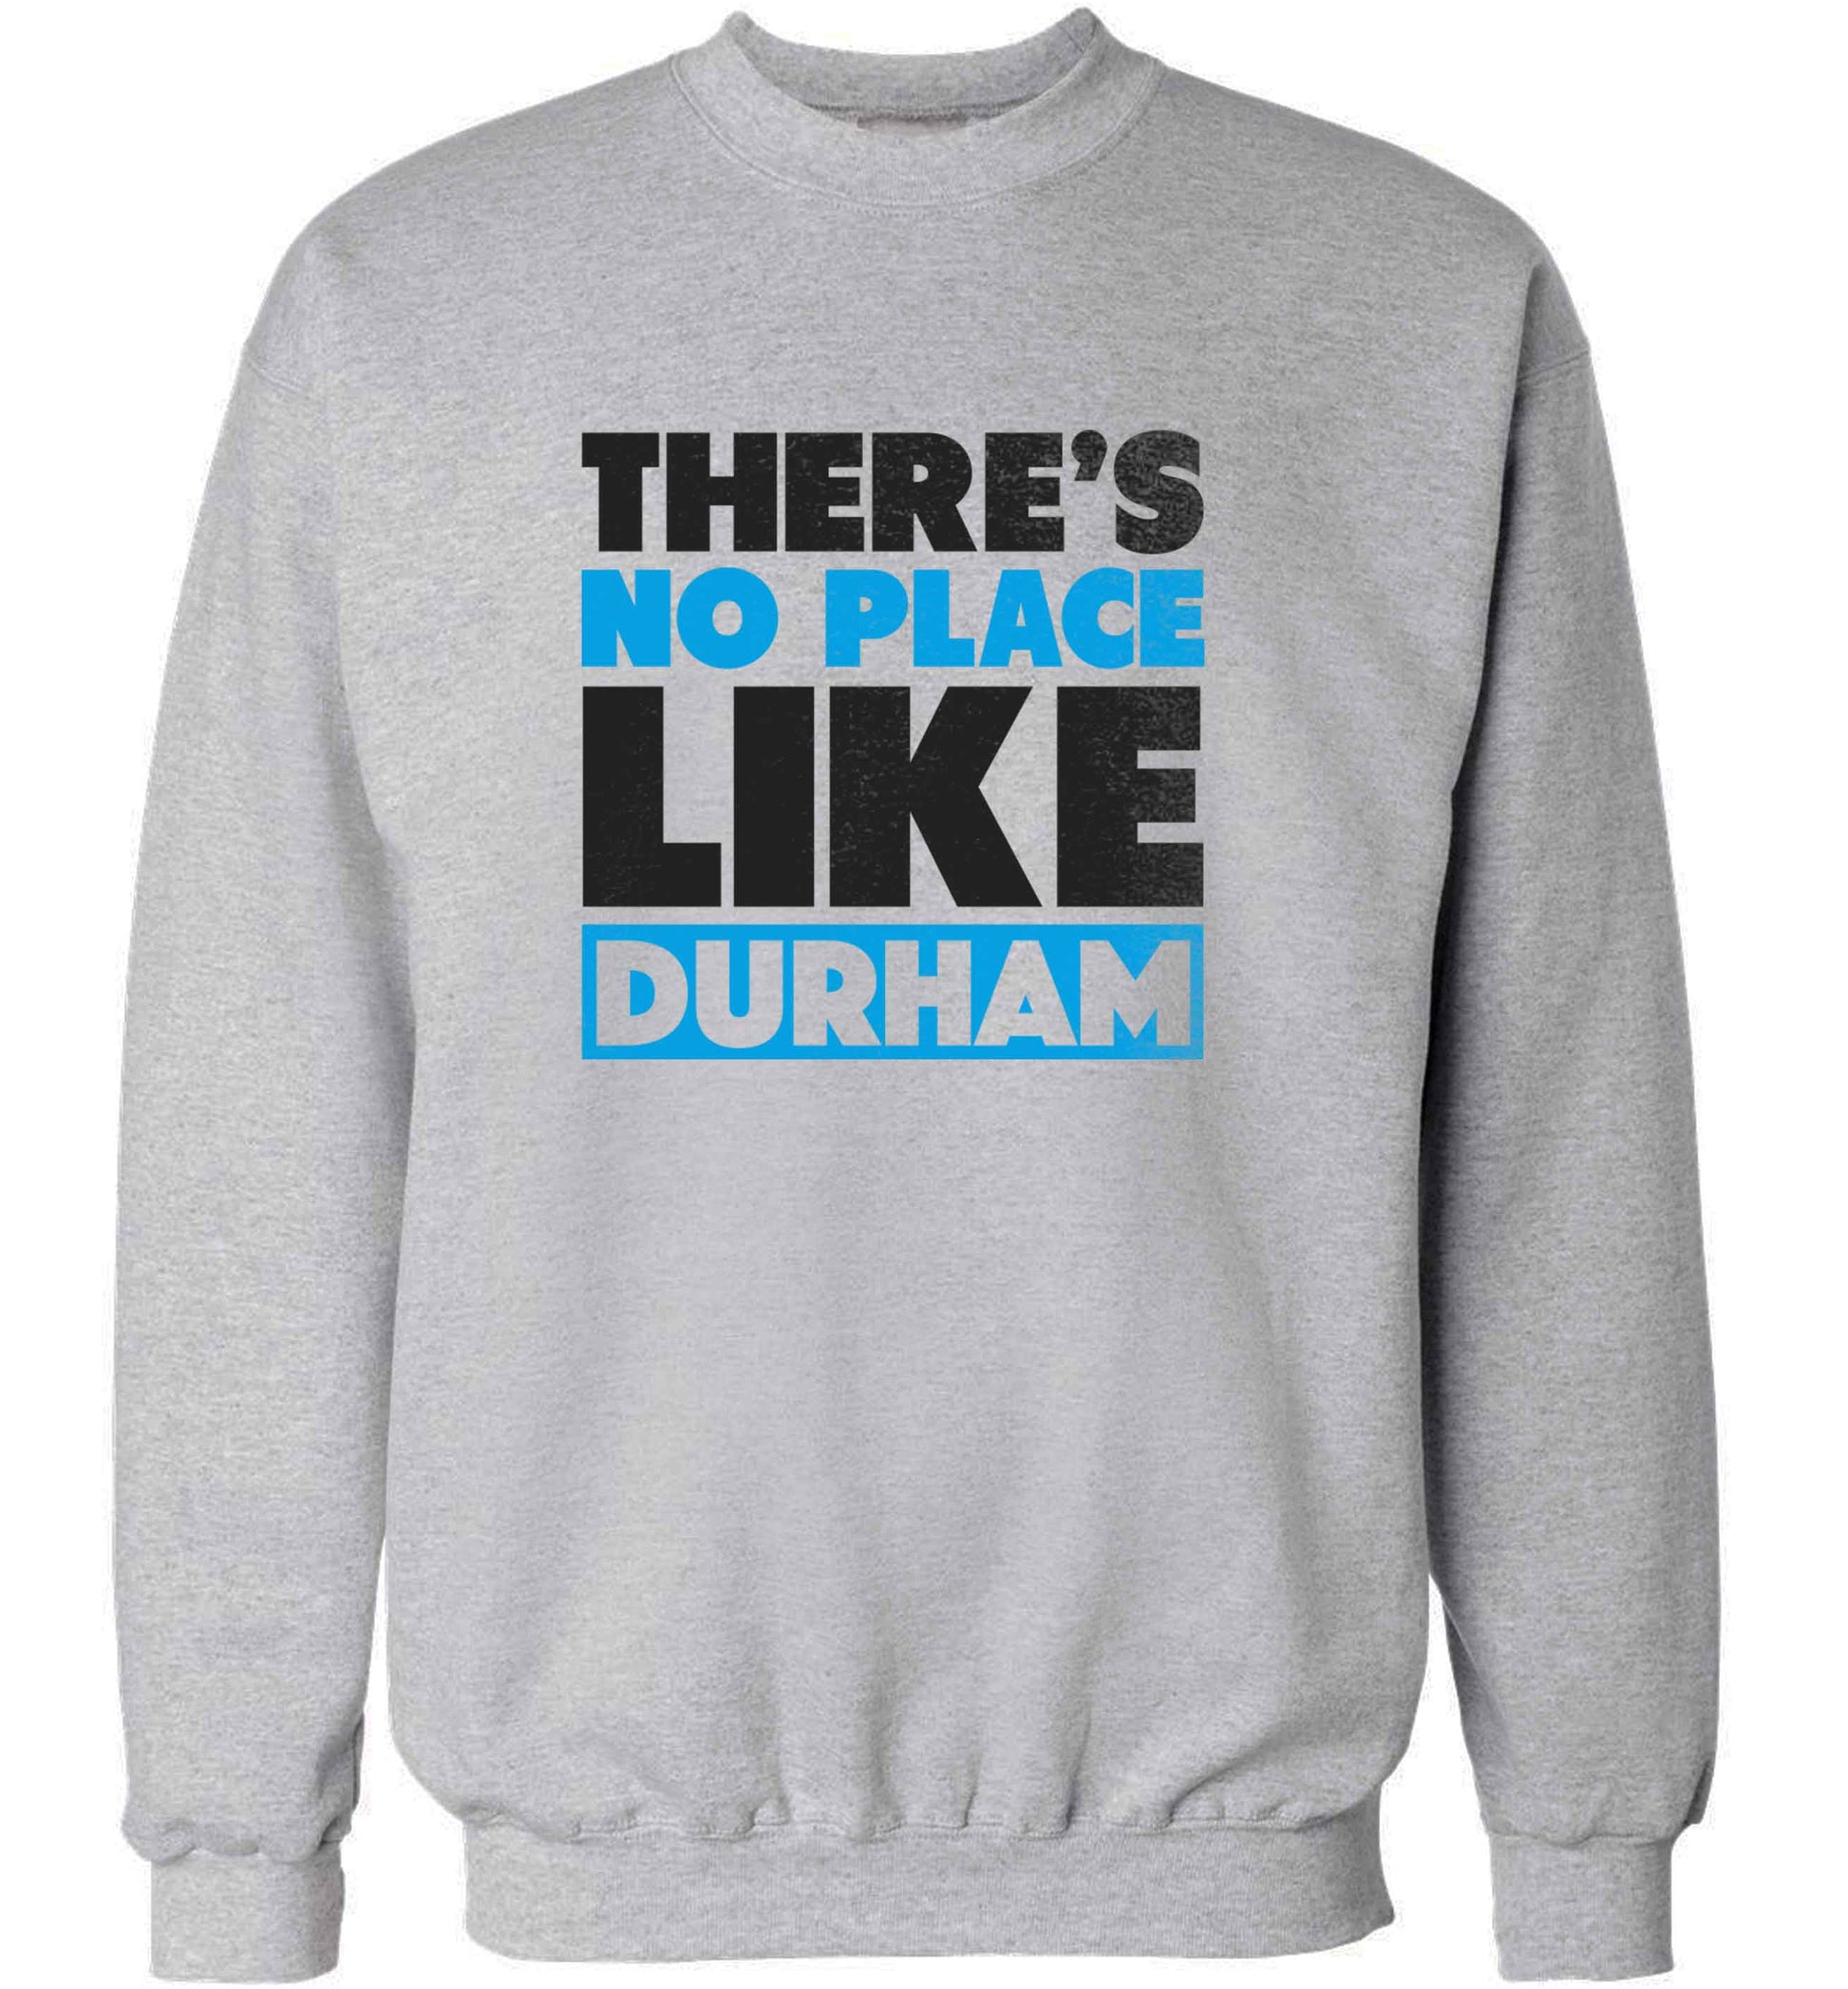 There's no place like Durham adult's unisex grey sweater 2XL